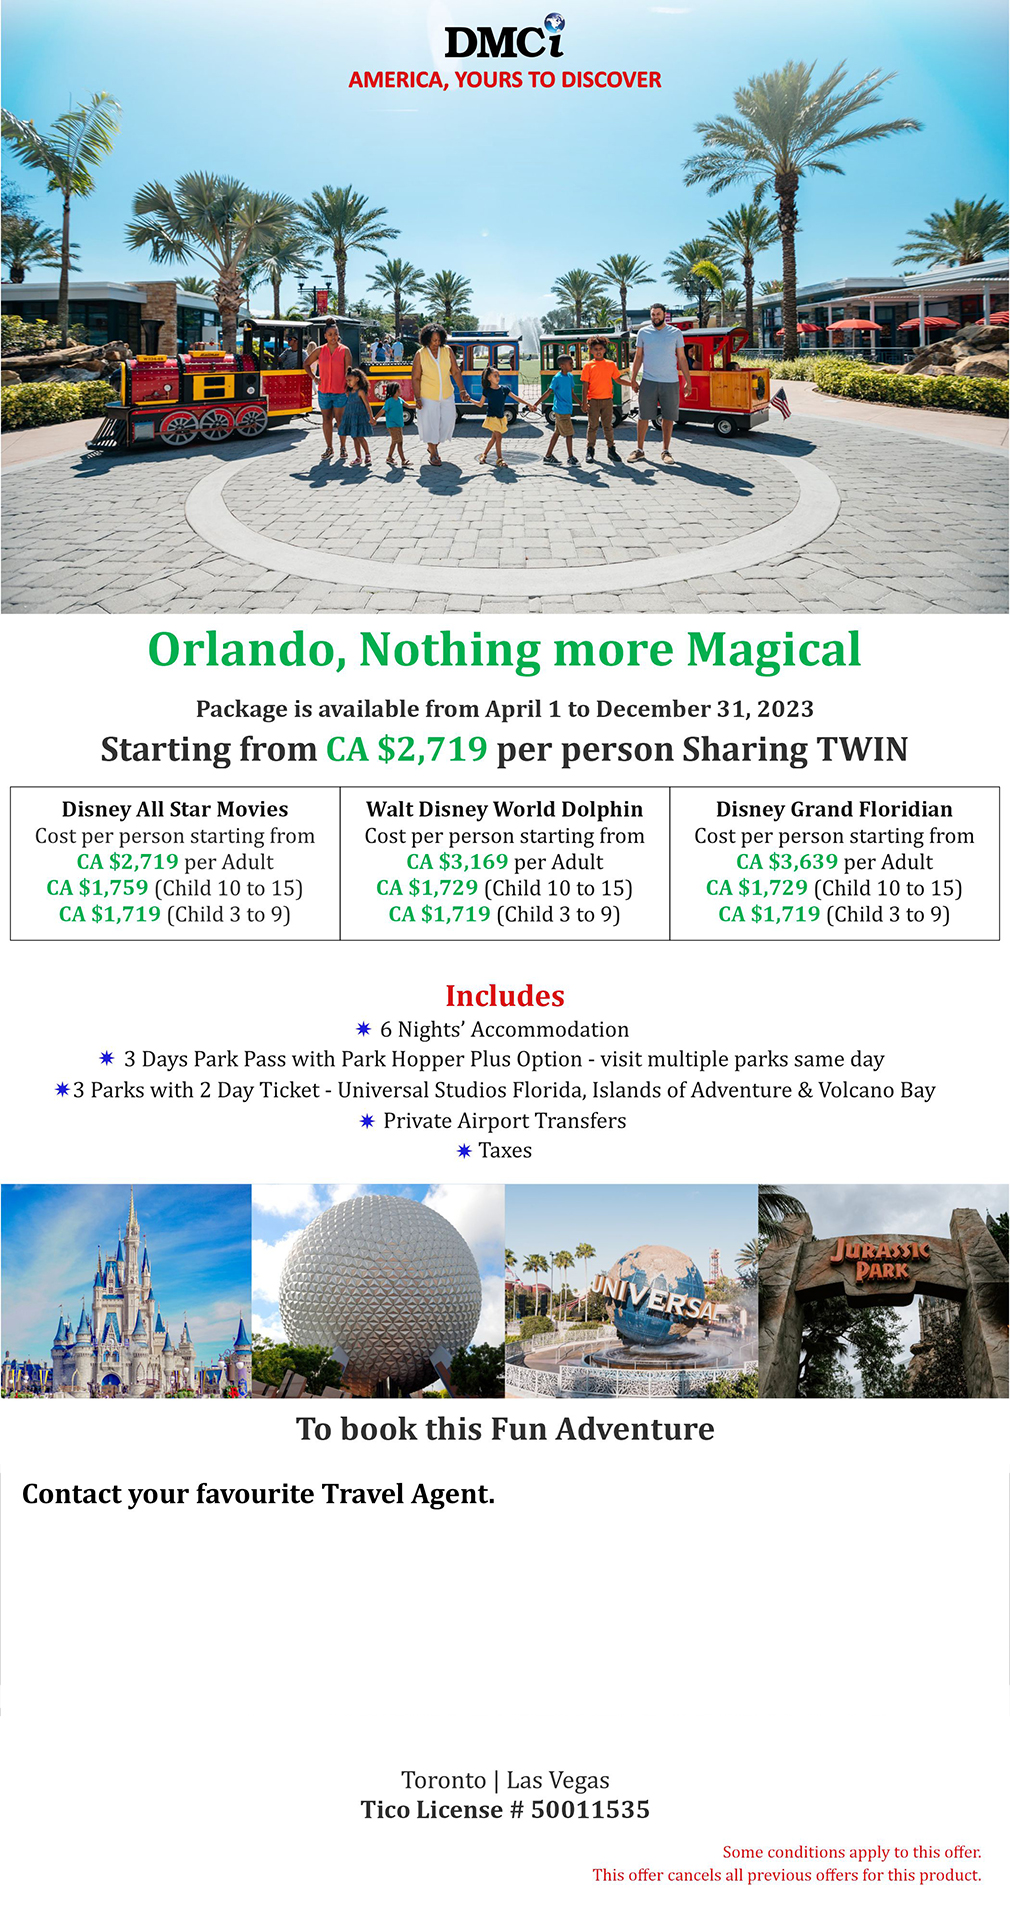 Orlando, Nothing More Magical